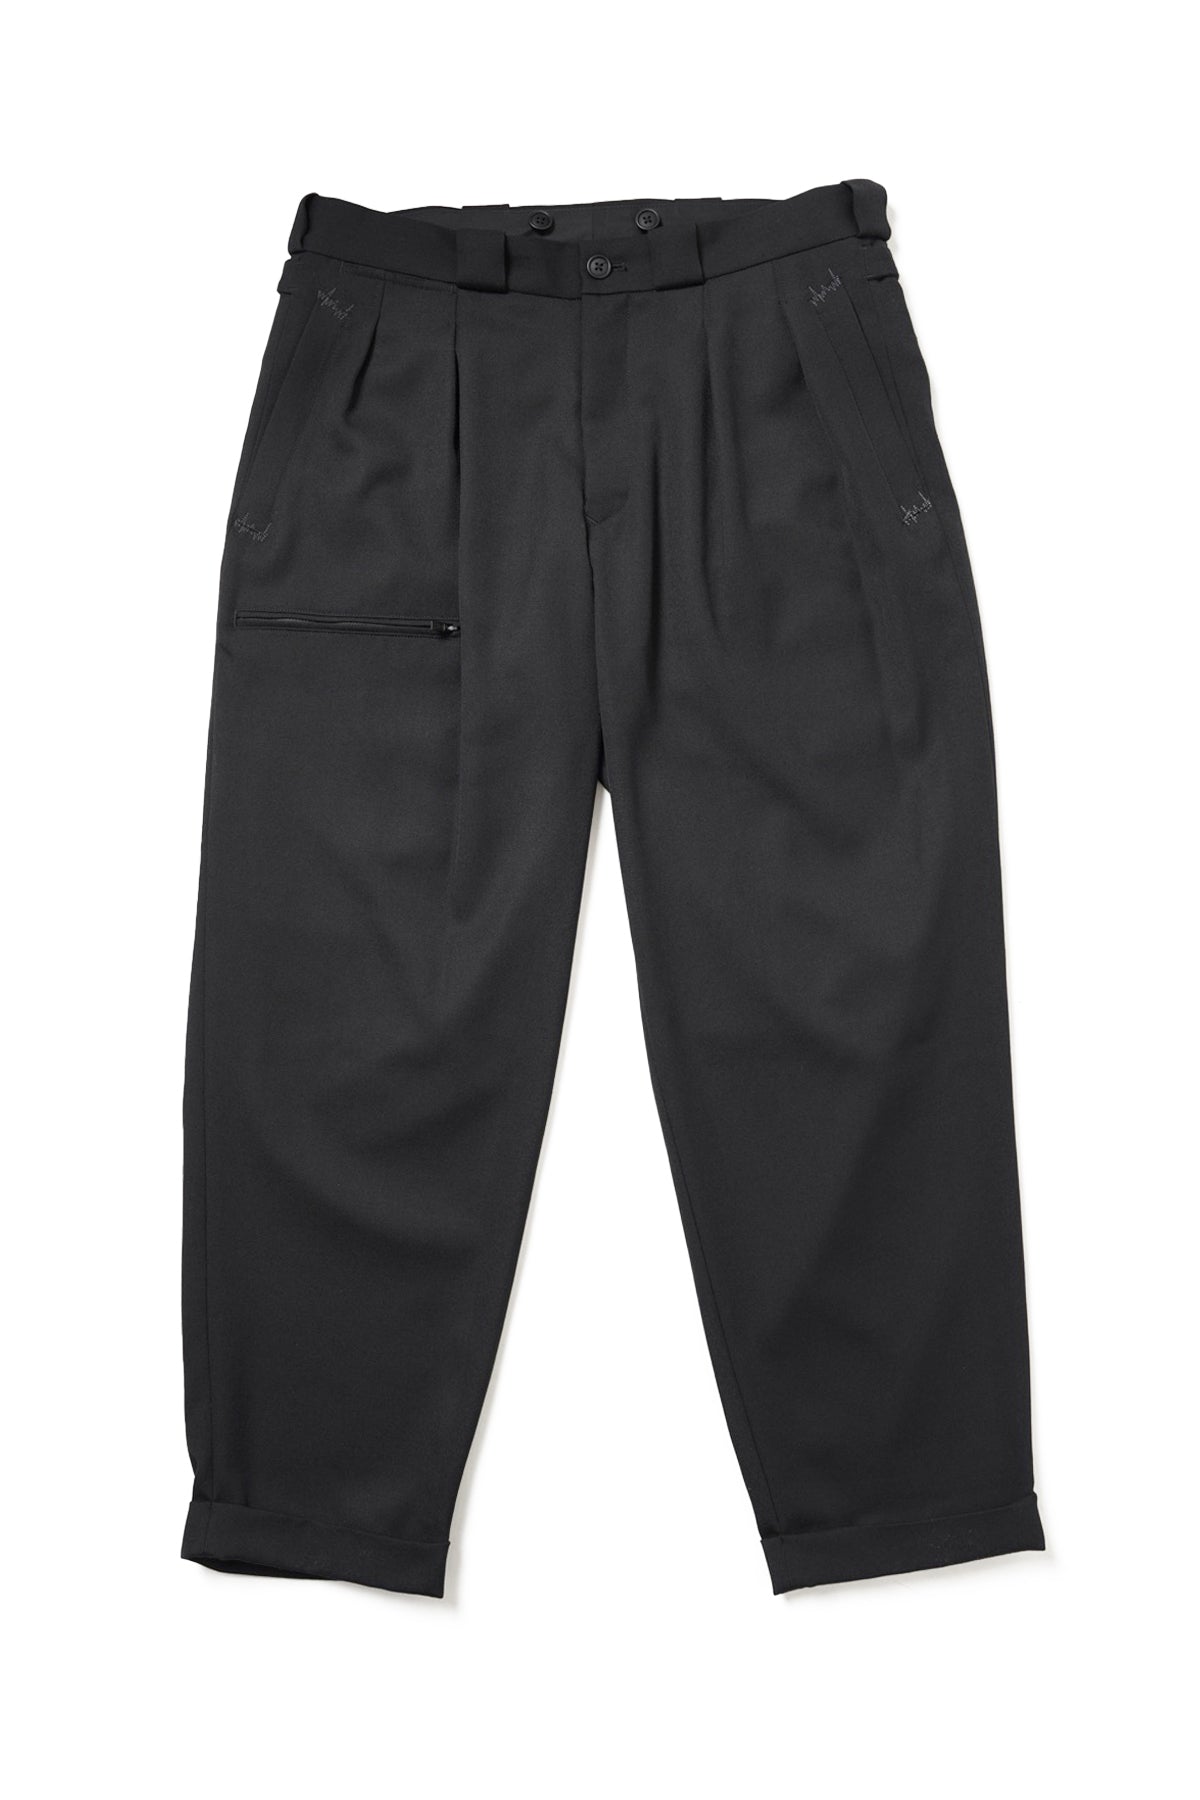 WOOL GABARDINE PANTS WITH SUSPENDER BUTTONS AND ADJUSTABLE SIDE TABS